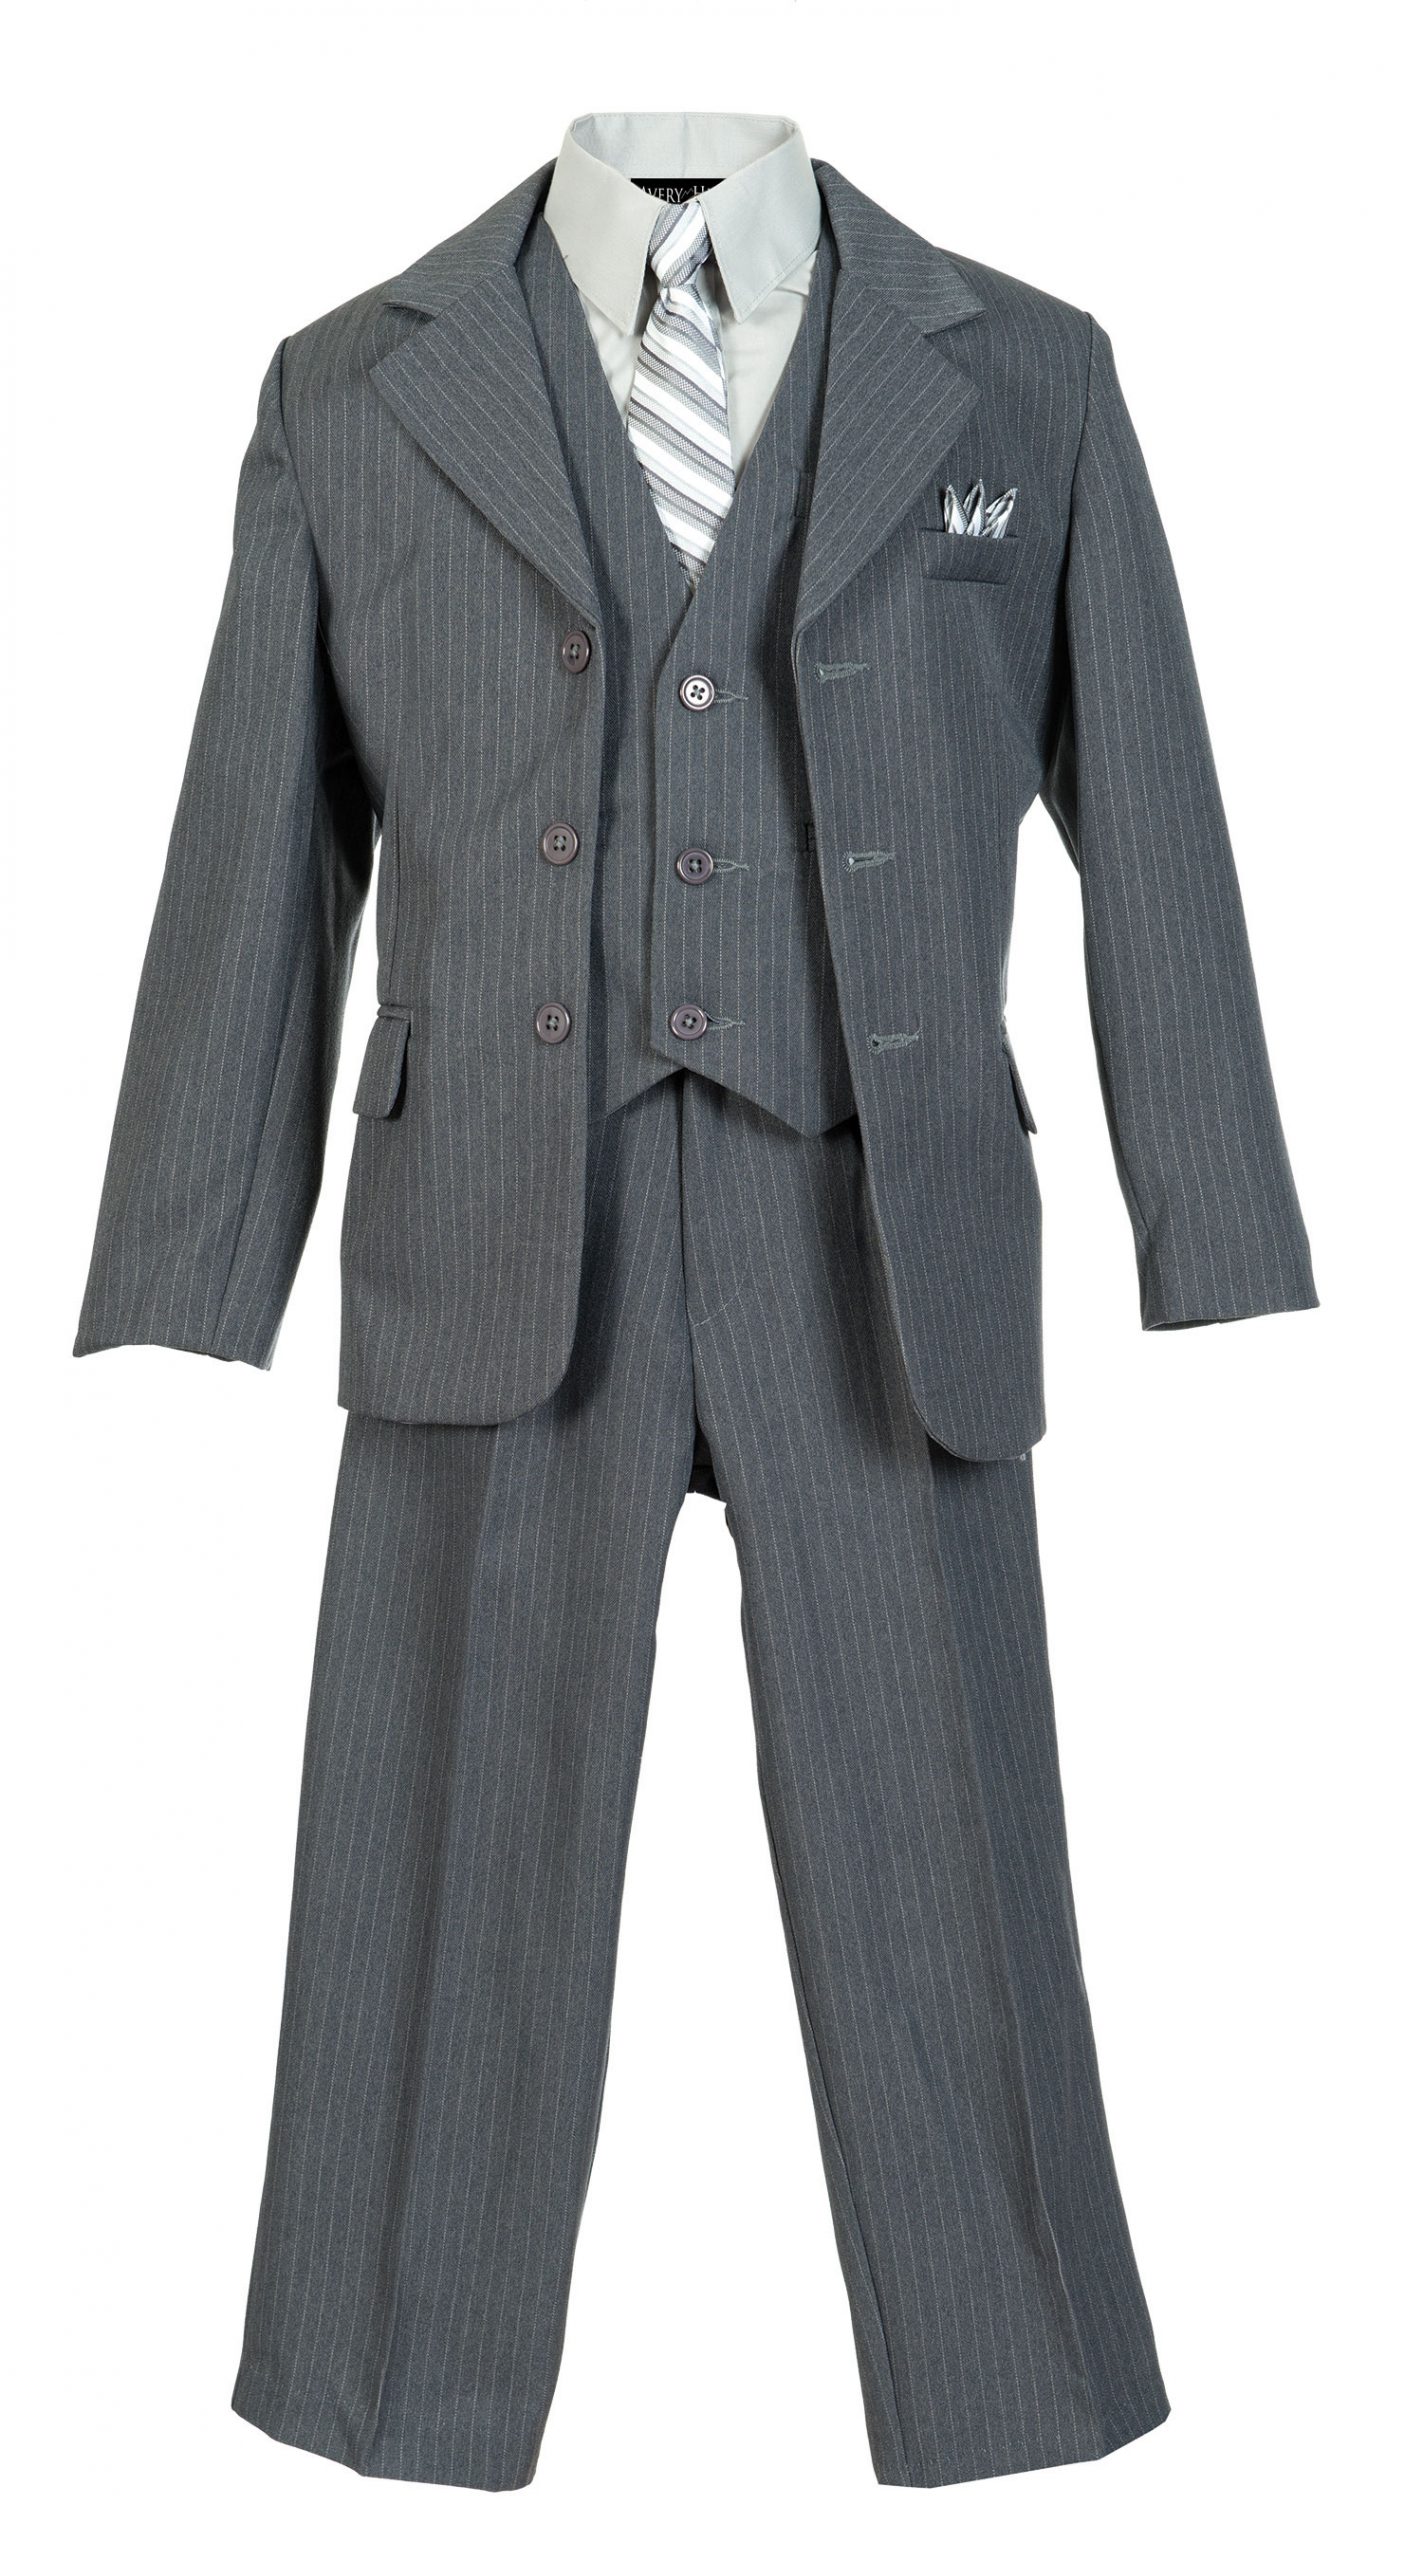 Boys Pinstripe Suit Set with Matching Tie LTGY 3T